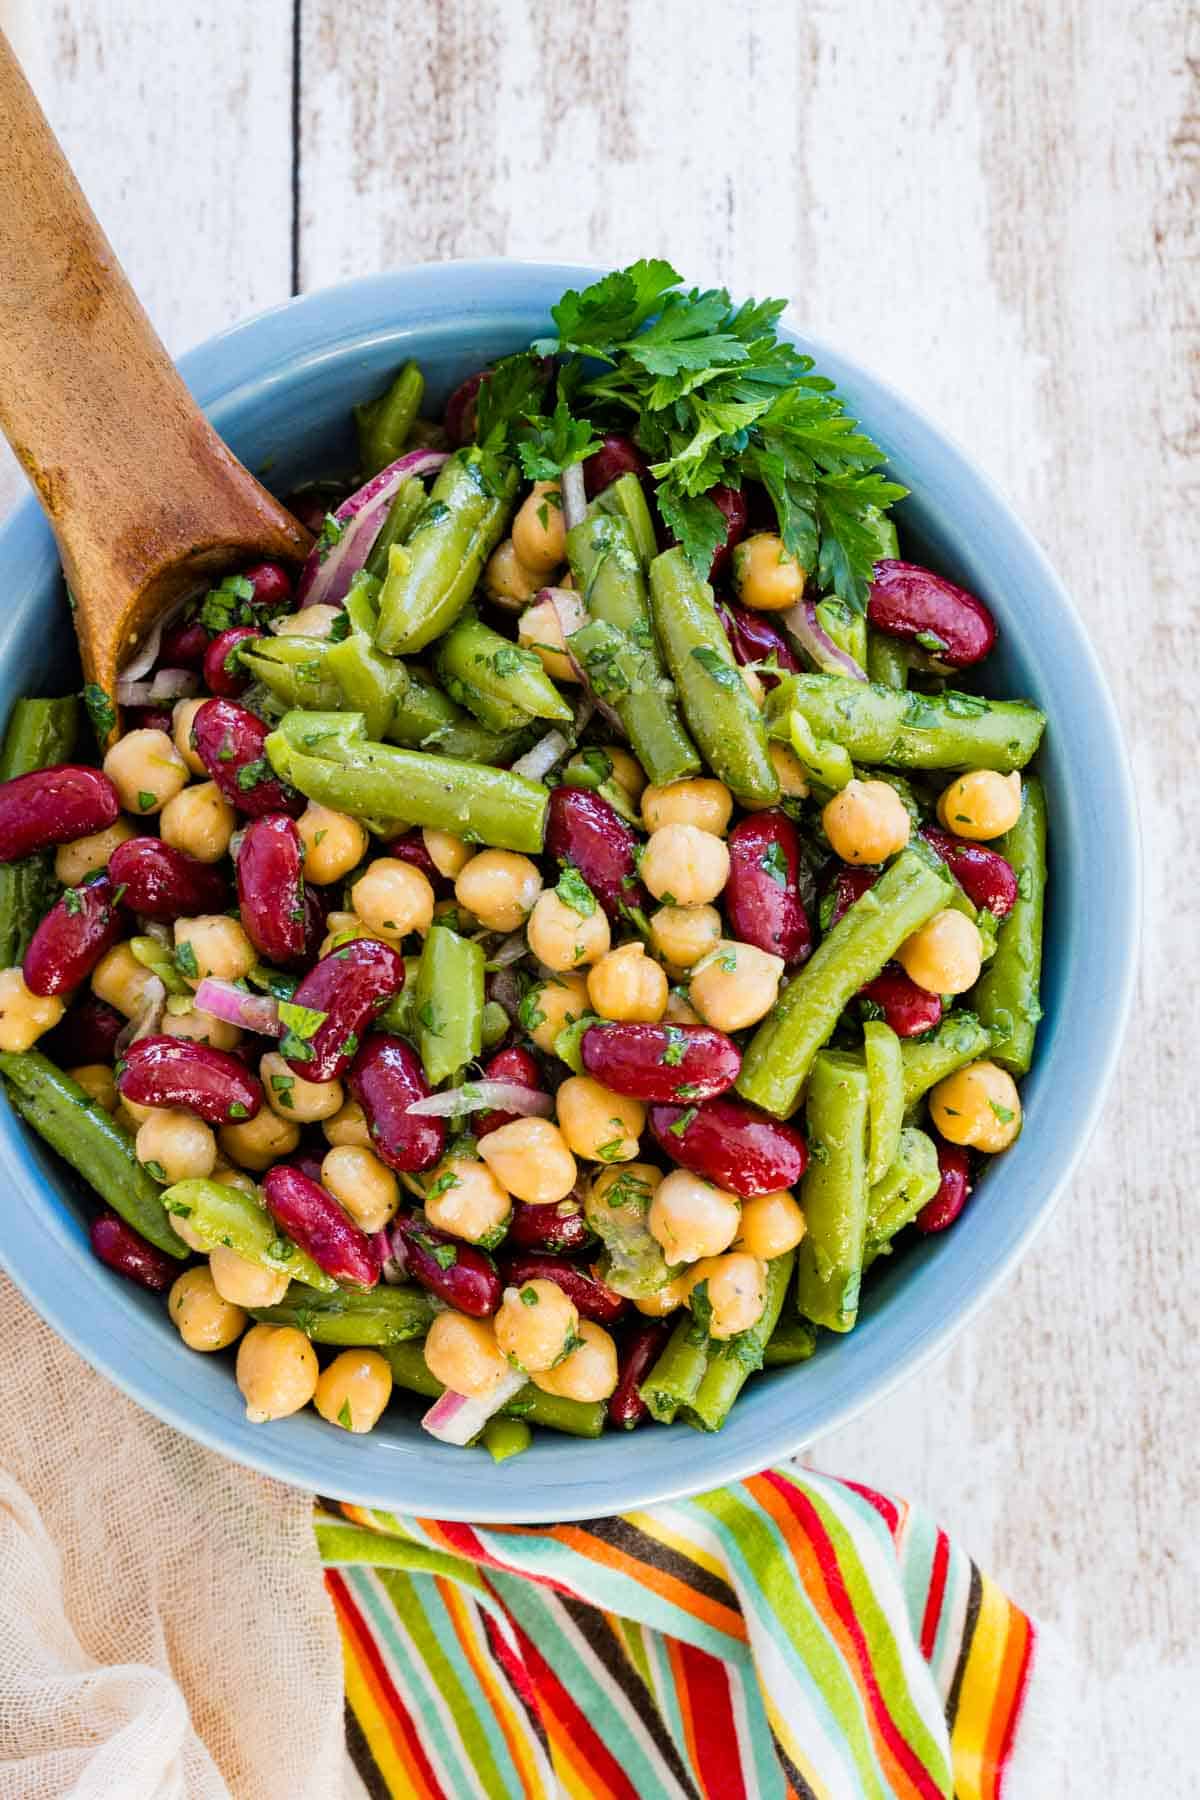 Top view of three bean salad in a blue bowl with a wooden spoon.